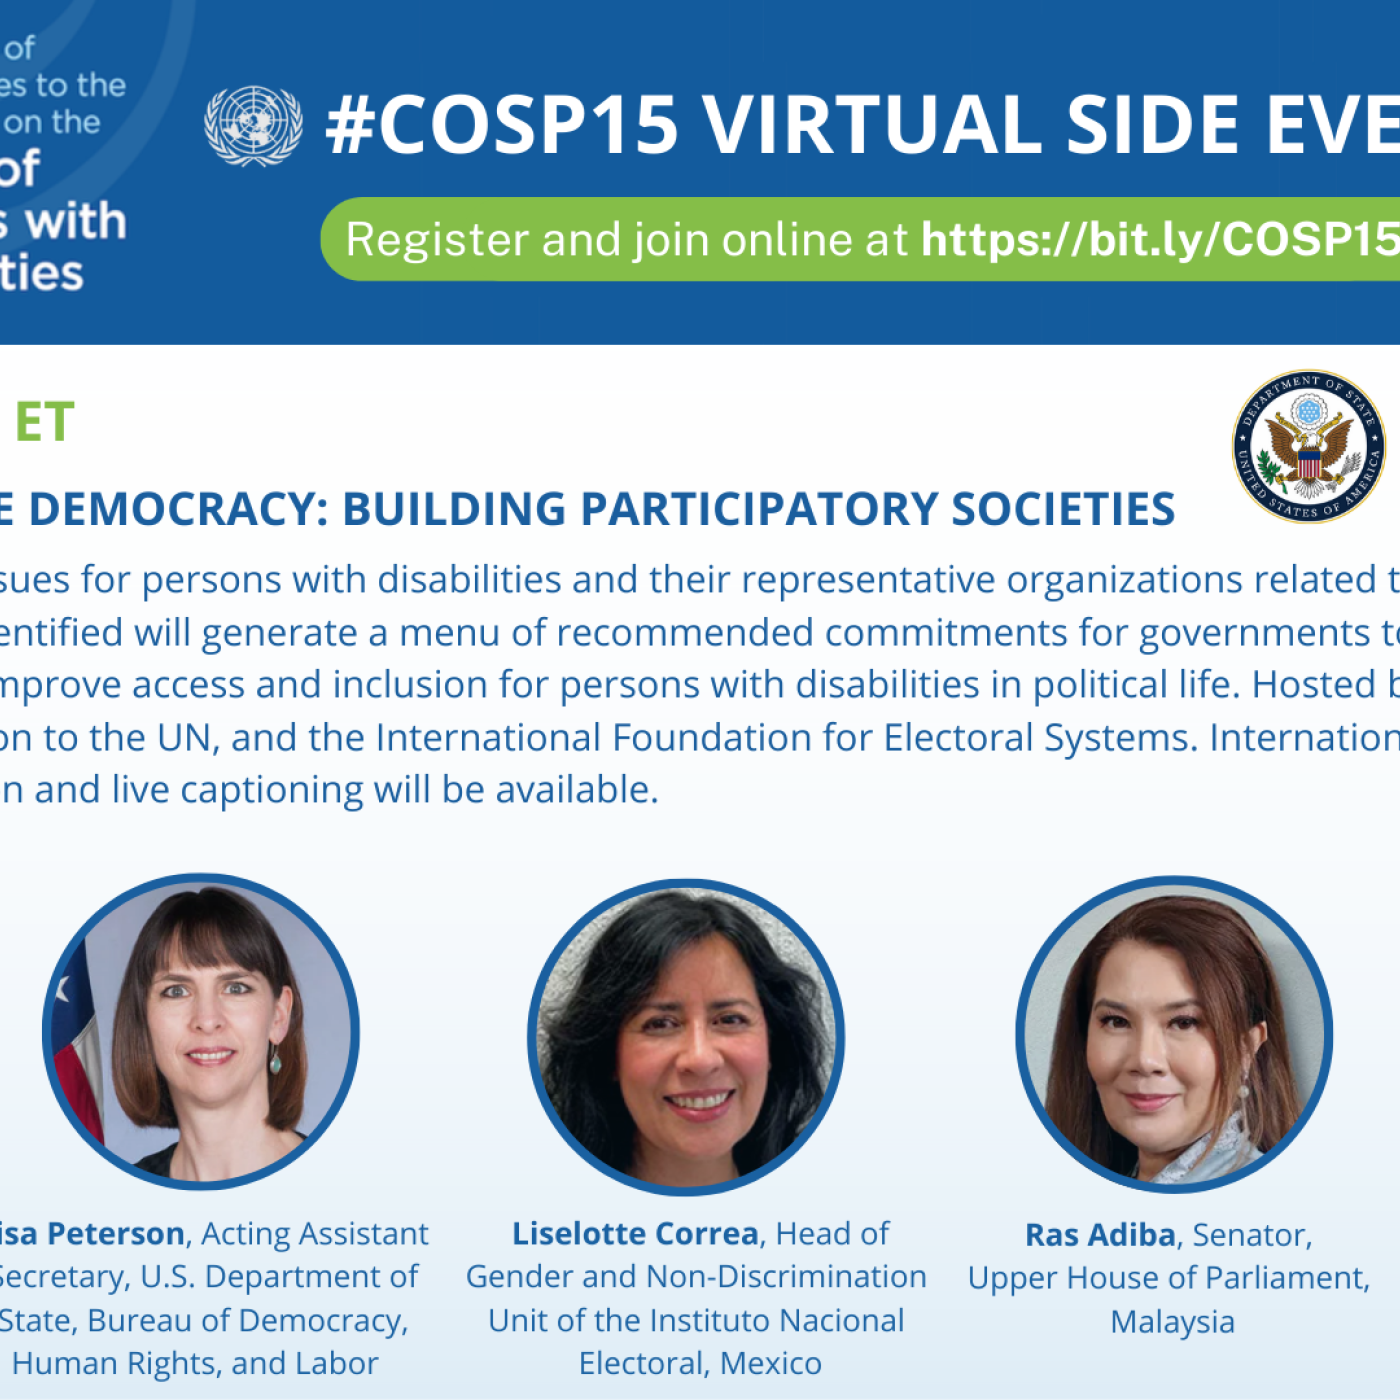 Event flyer for COSP15 virtual side event, June 13, 1:15-2:30p.m. EDT. Disability Inclusive Democracy: Building Participatory Societies Hosted by the U.S. Department of State, USAID, the U.S. Mission to the UN and the International Foundation for Electora